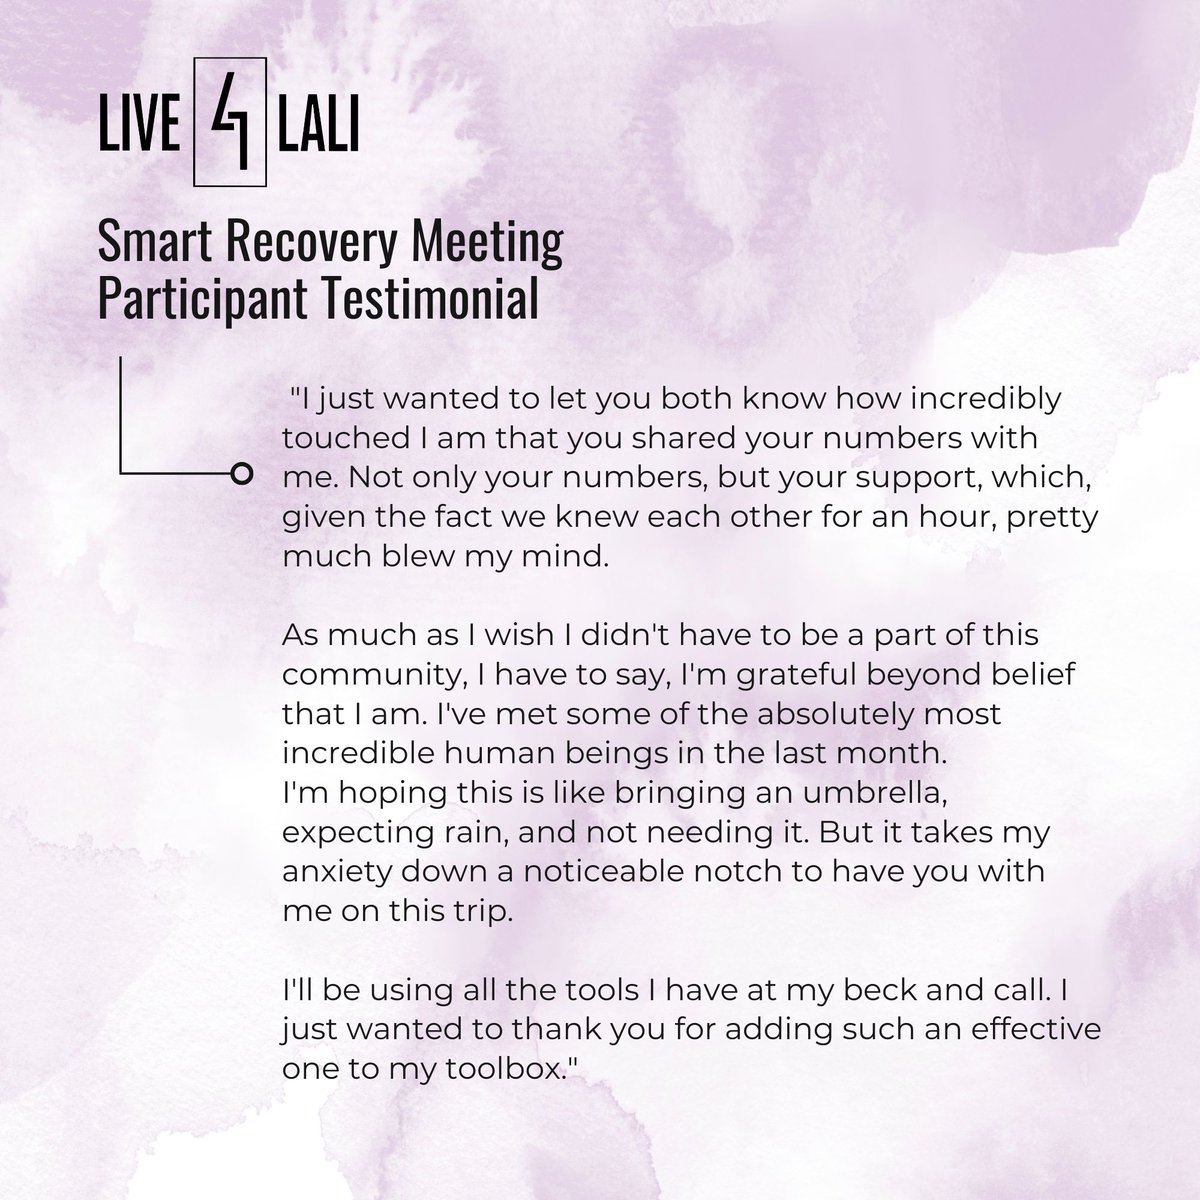 Despite the obstacles, it's testimonials like the one I received that inspire us to continue our work at Live4Lali. We are motivated by the resilience of our recovery community

live4lali.org/peersupport.

#RecoveryCommunity